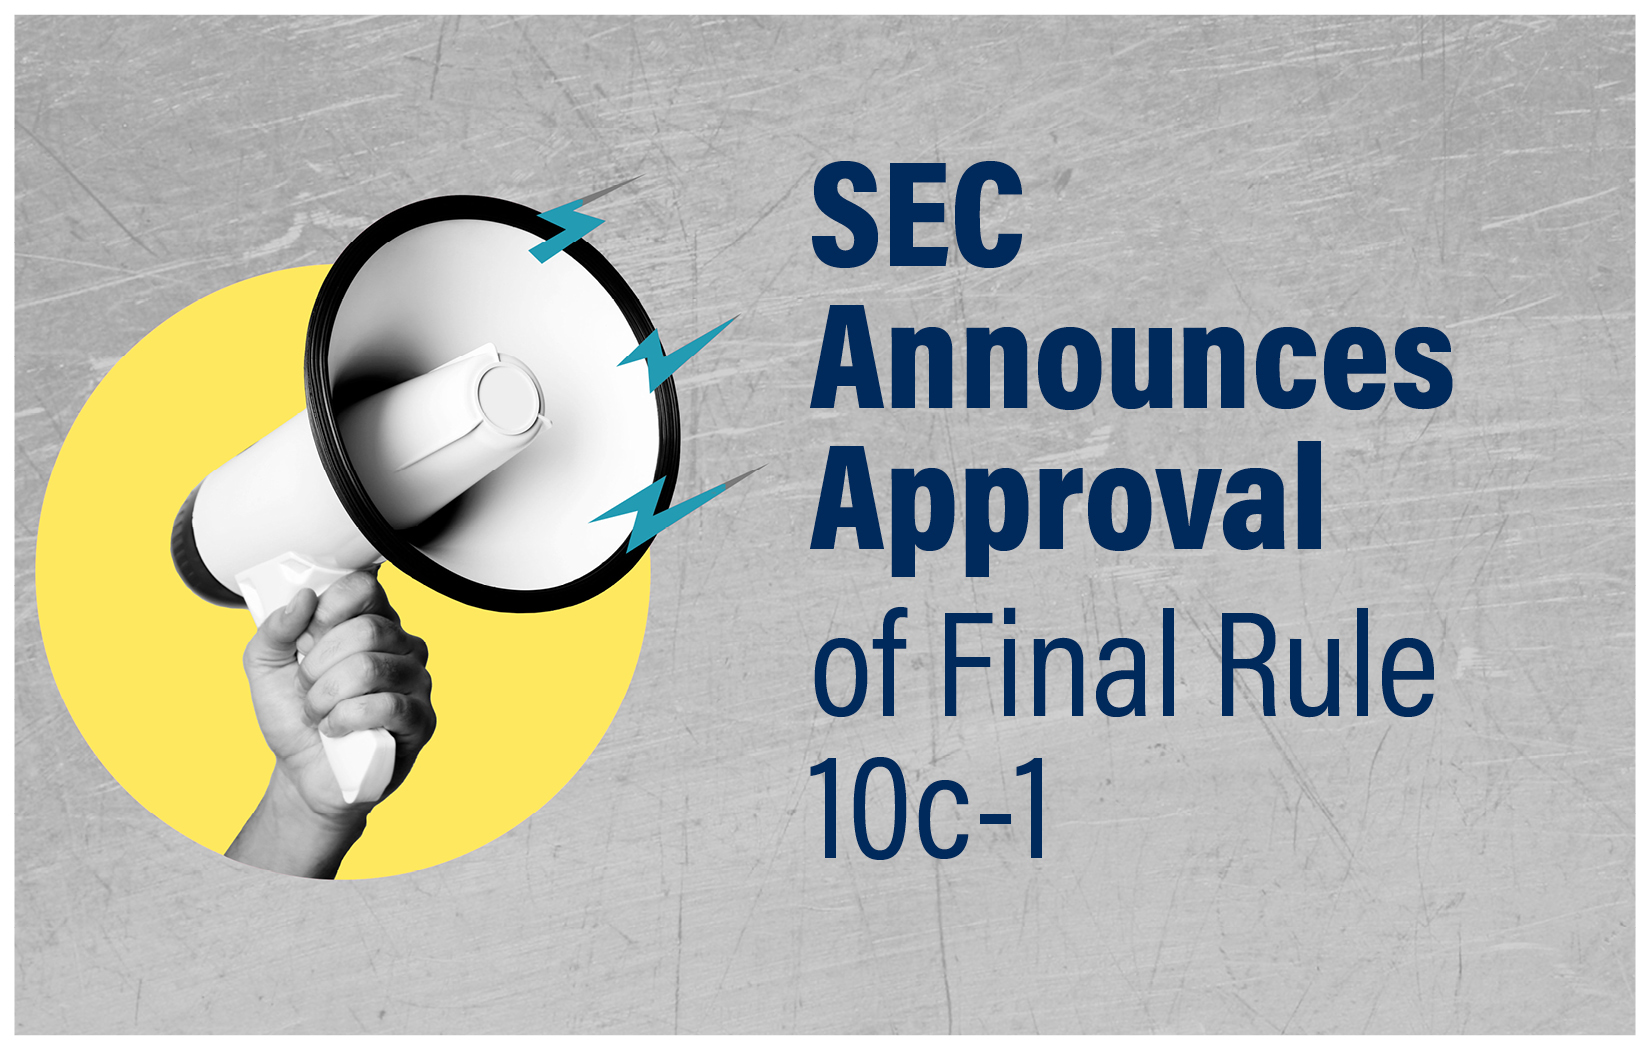 EquiLend Statement on SEC Rule 10c-1 Announcement